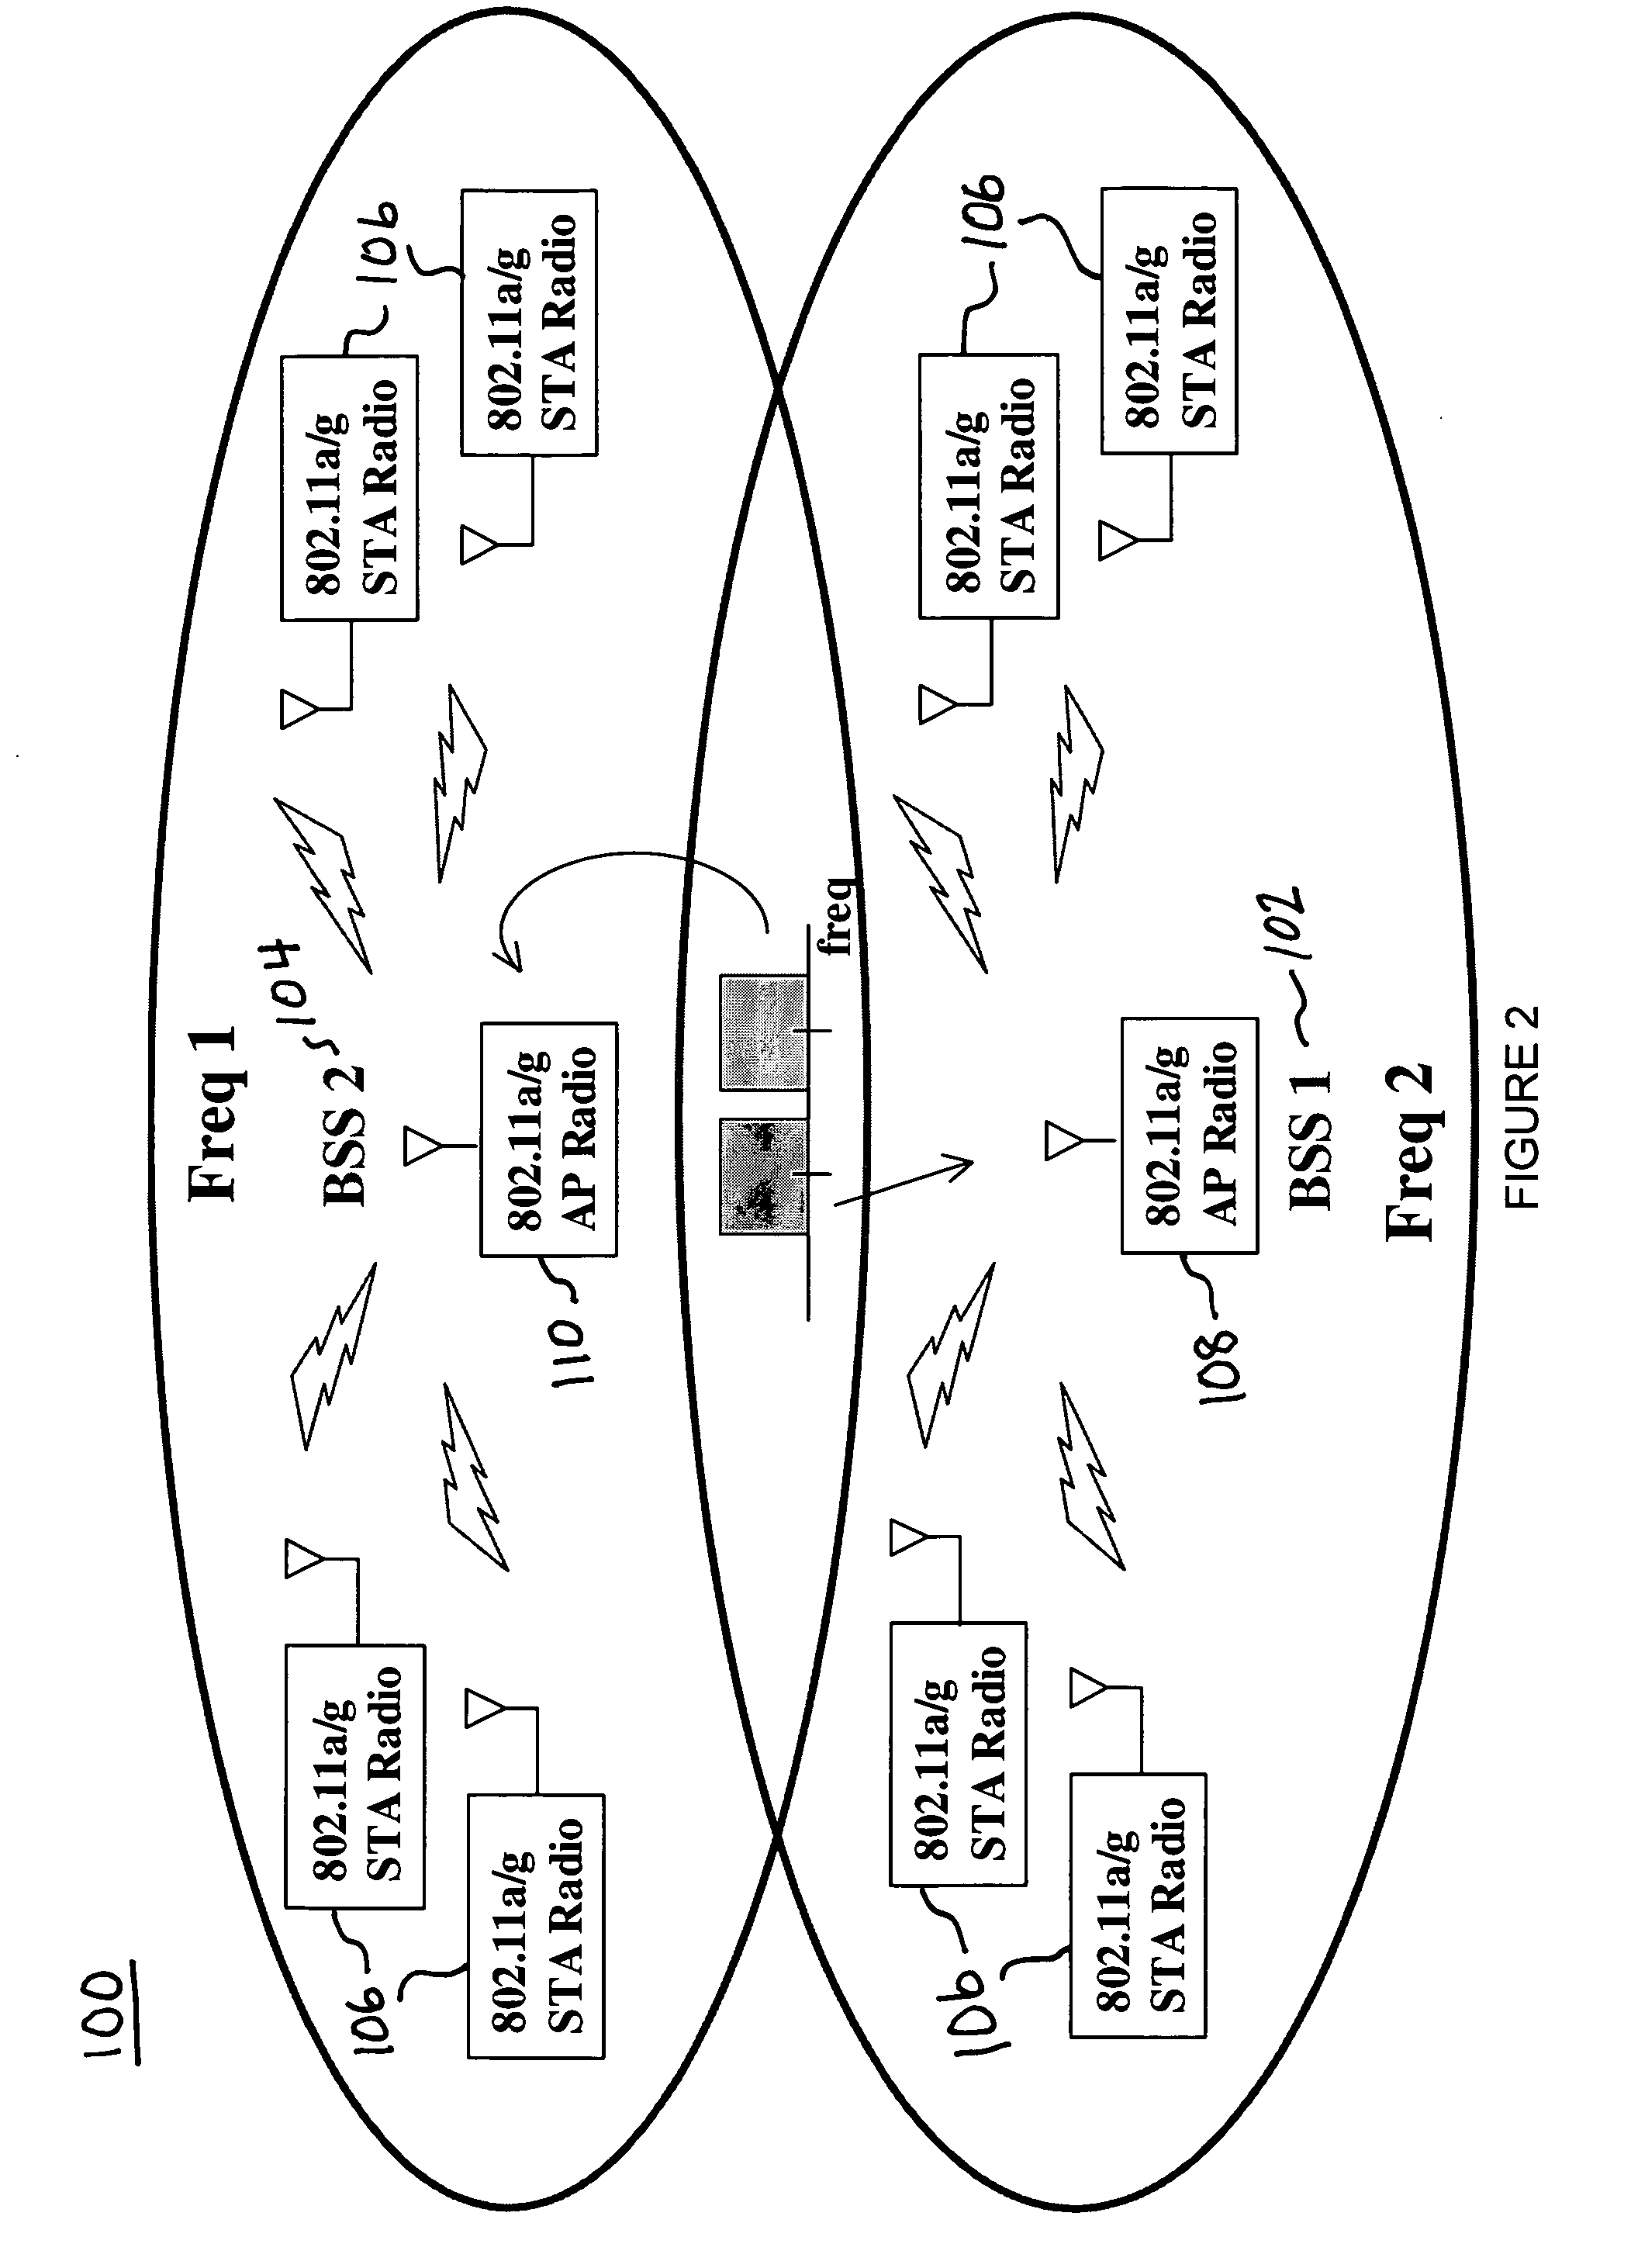 Method and system for high data rate multi-channel WLAN architecture